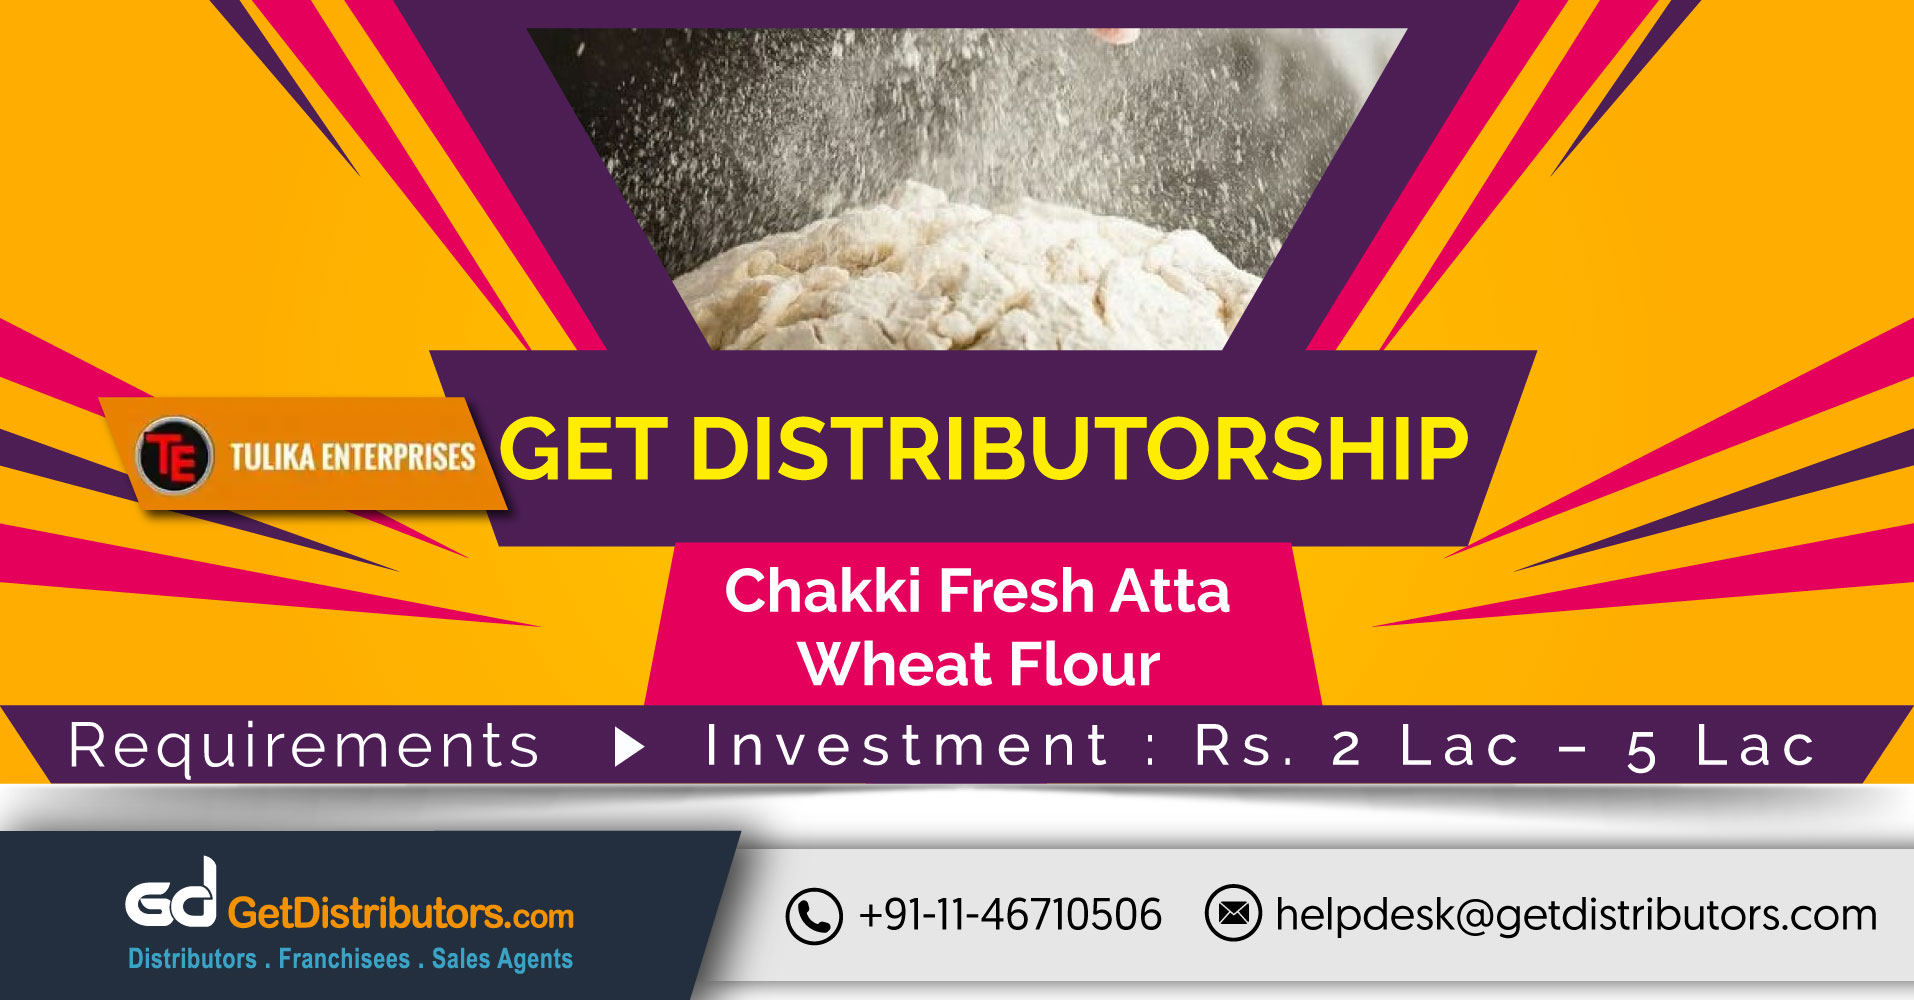 Get The Distributorship Of Unadulterated Atta (Wheat Flour) At Affordable Prices